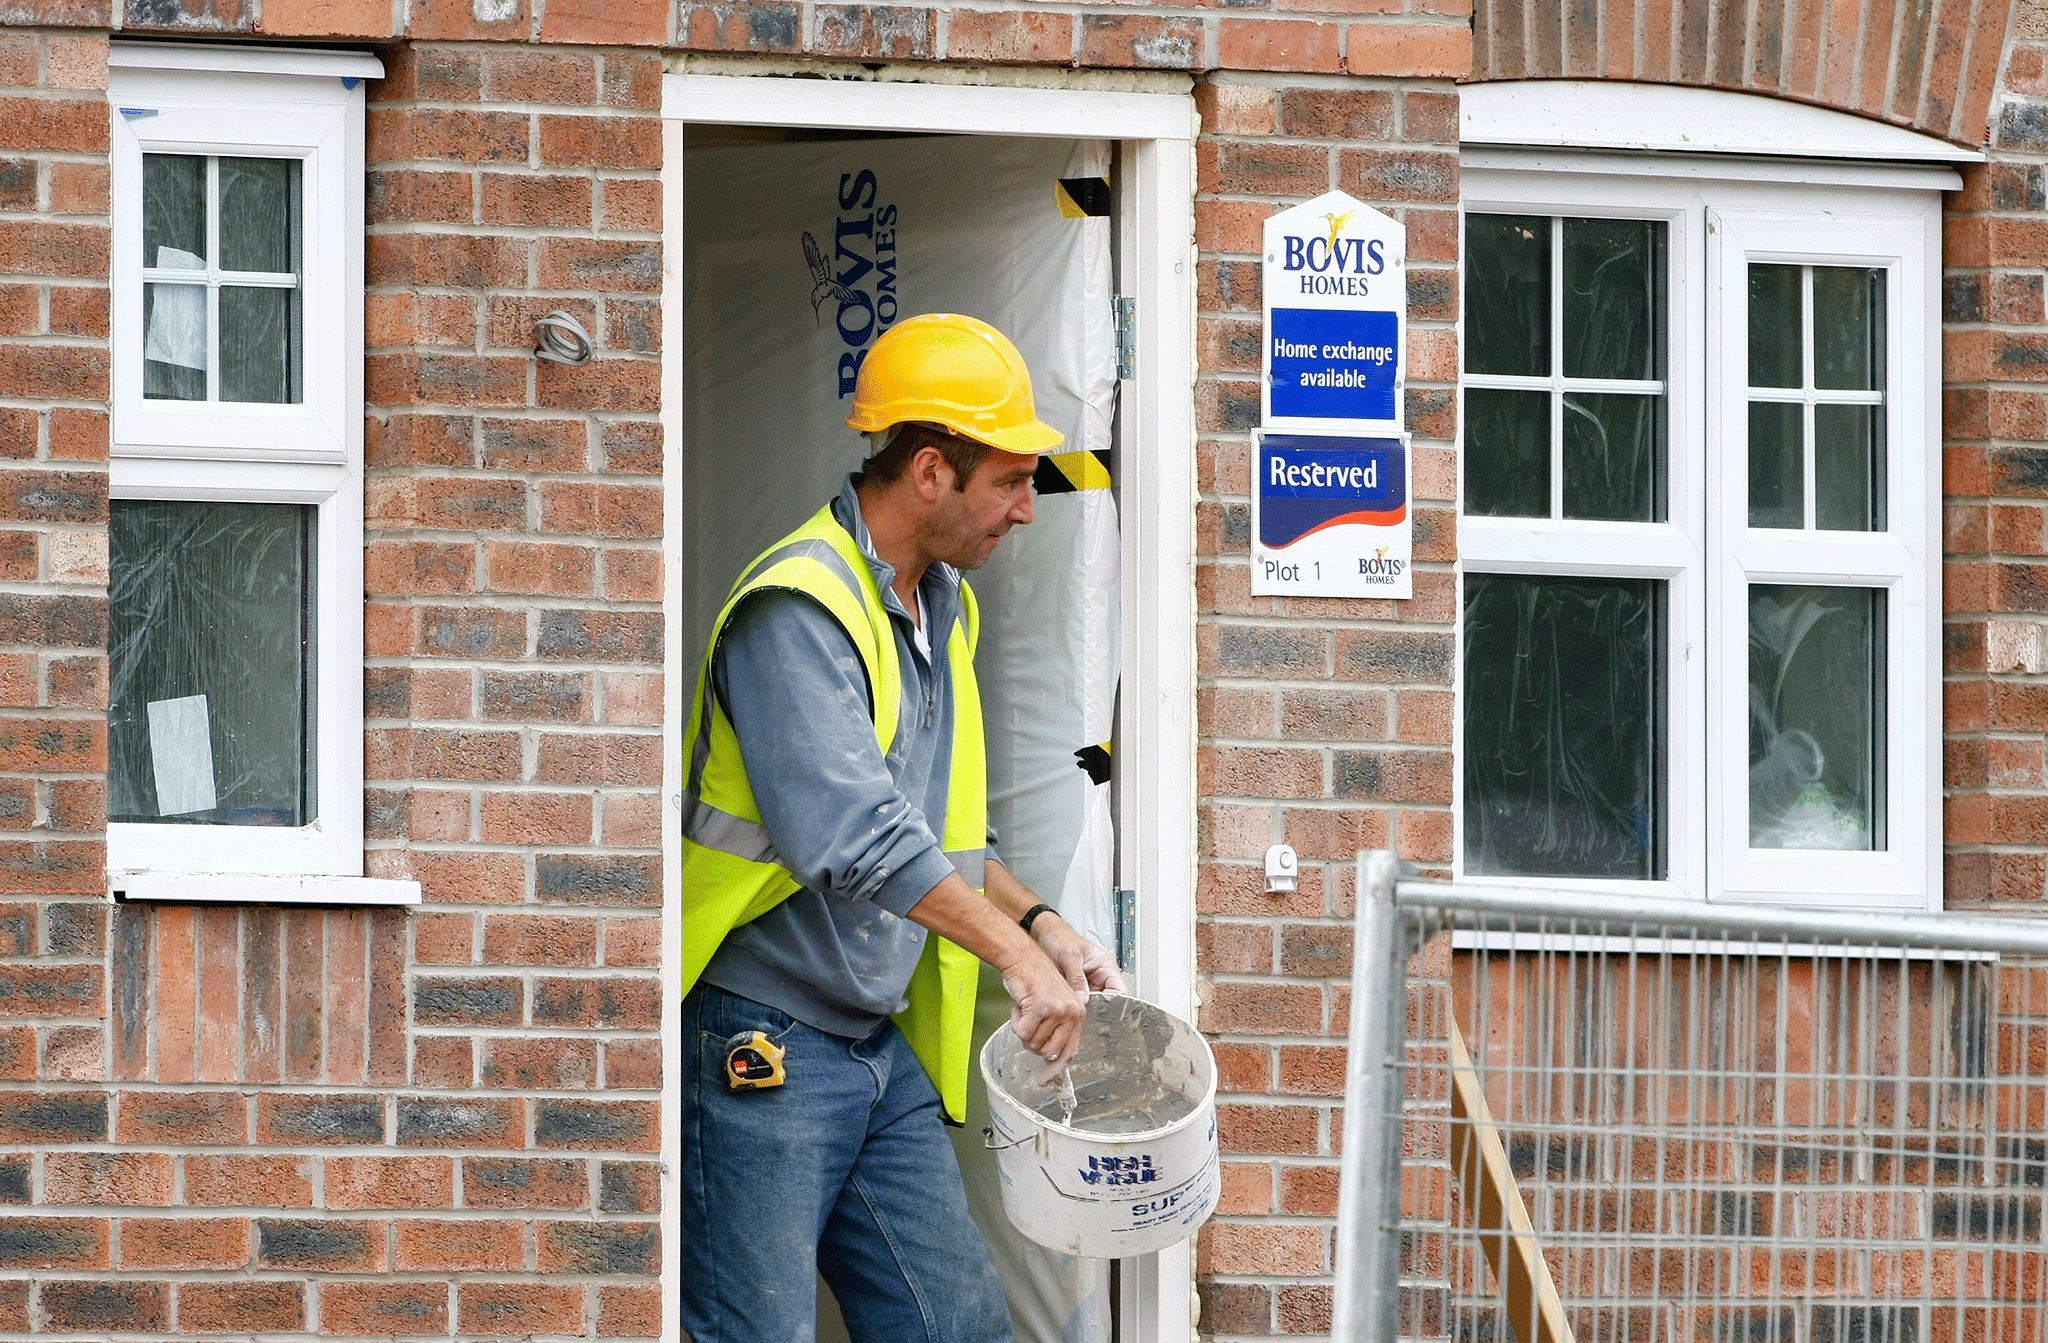 The update from Bovis weighed on the share prices of rival firms with Crest Nicholson, Berkeley Group and John Laing all falling